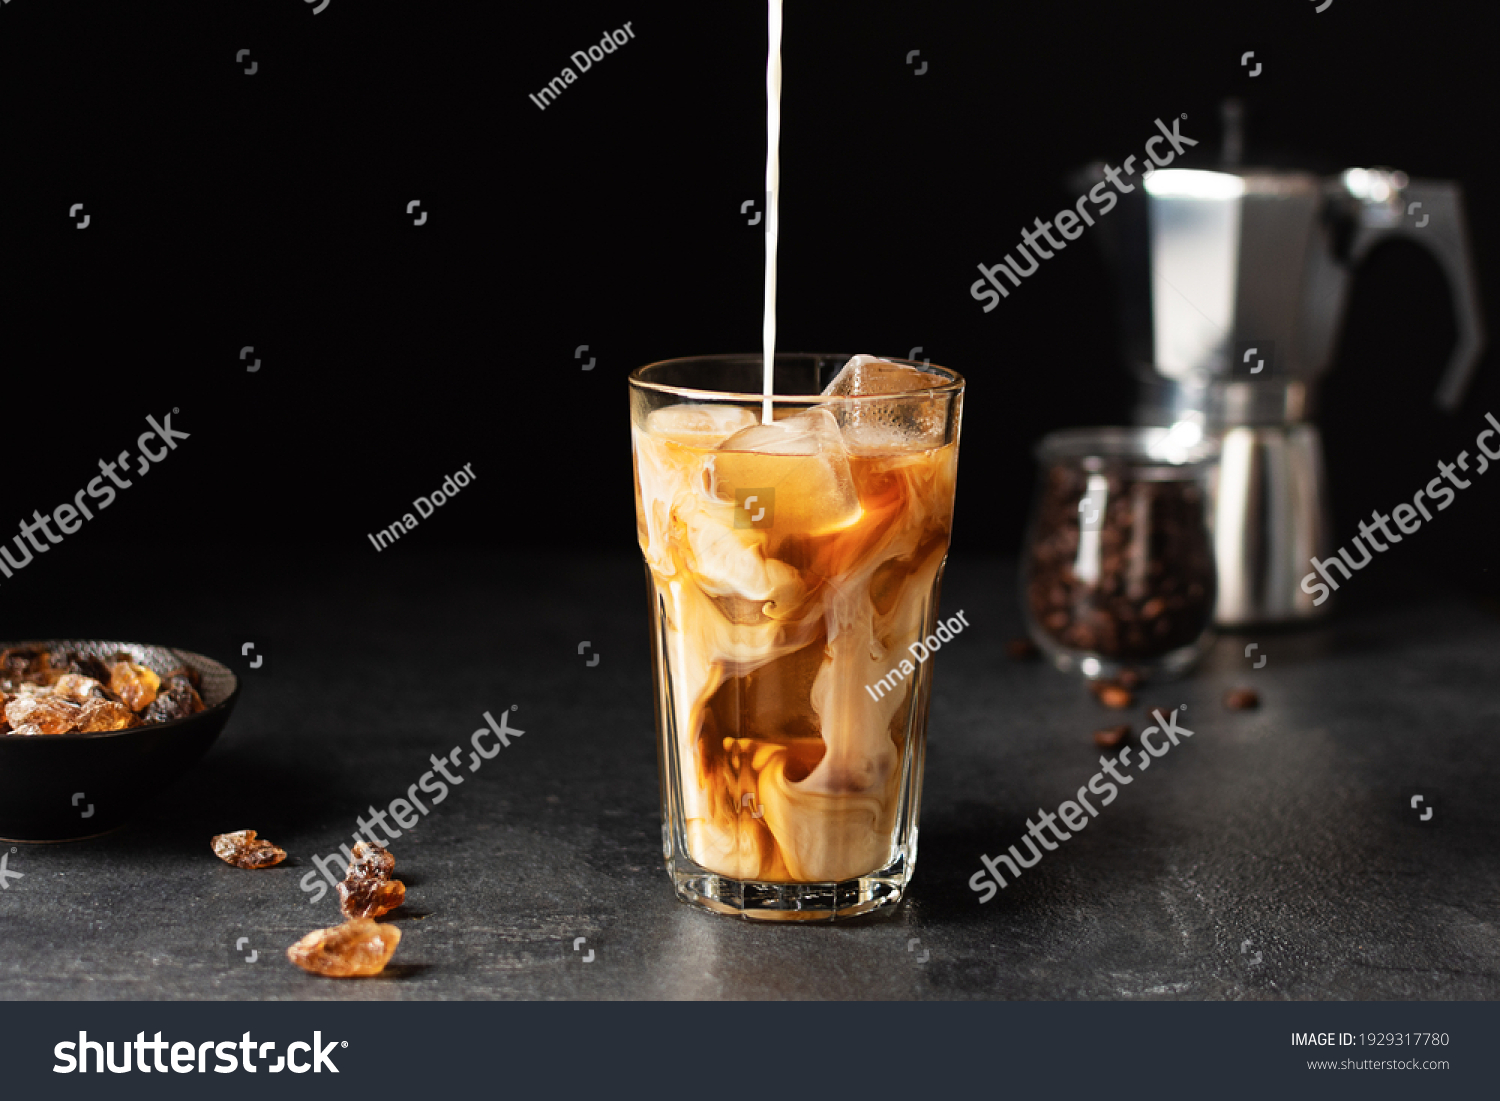 Pouring milk into a glass with iced coffee over black background. Cold refreshment summer drink. #1929317780